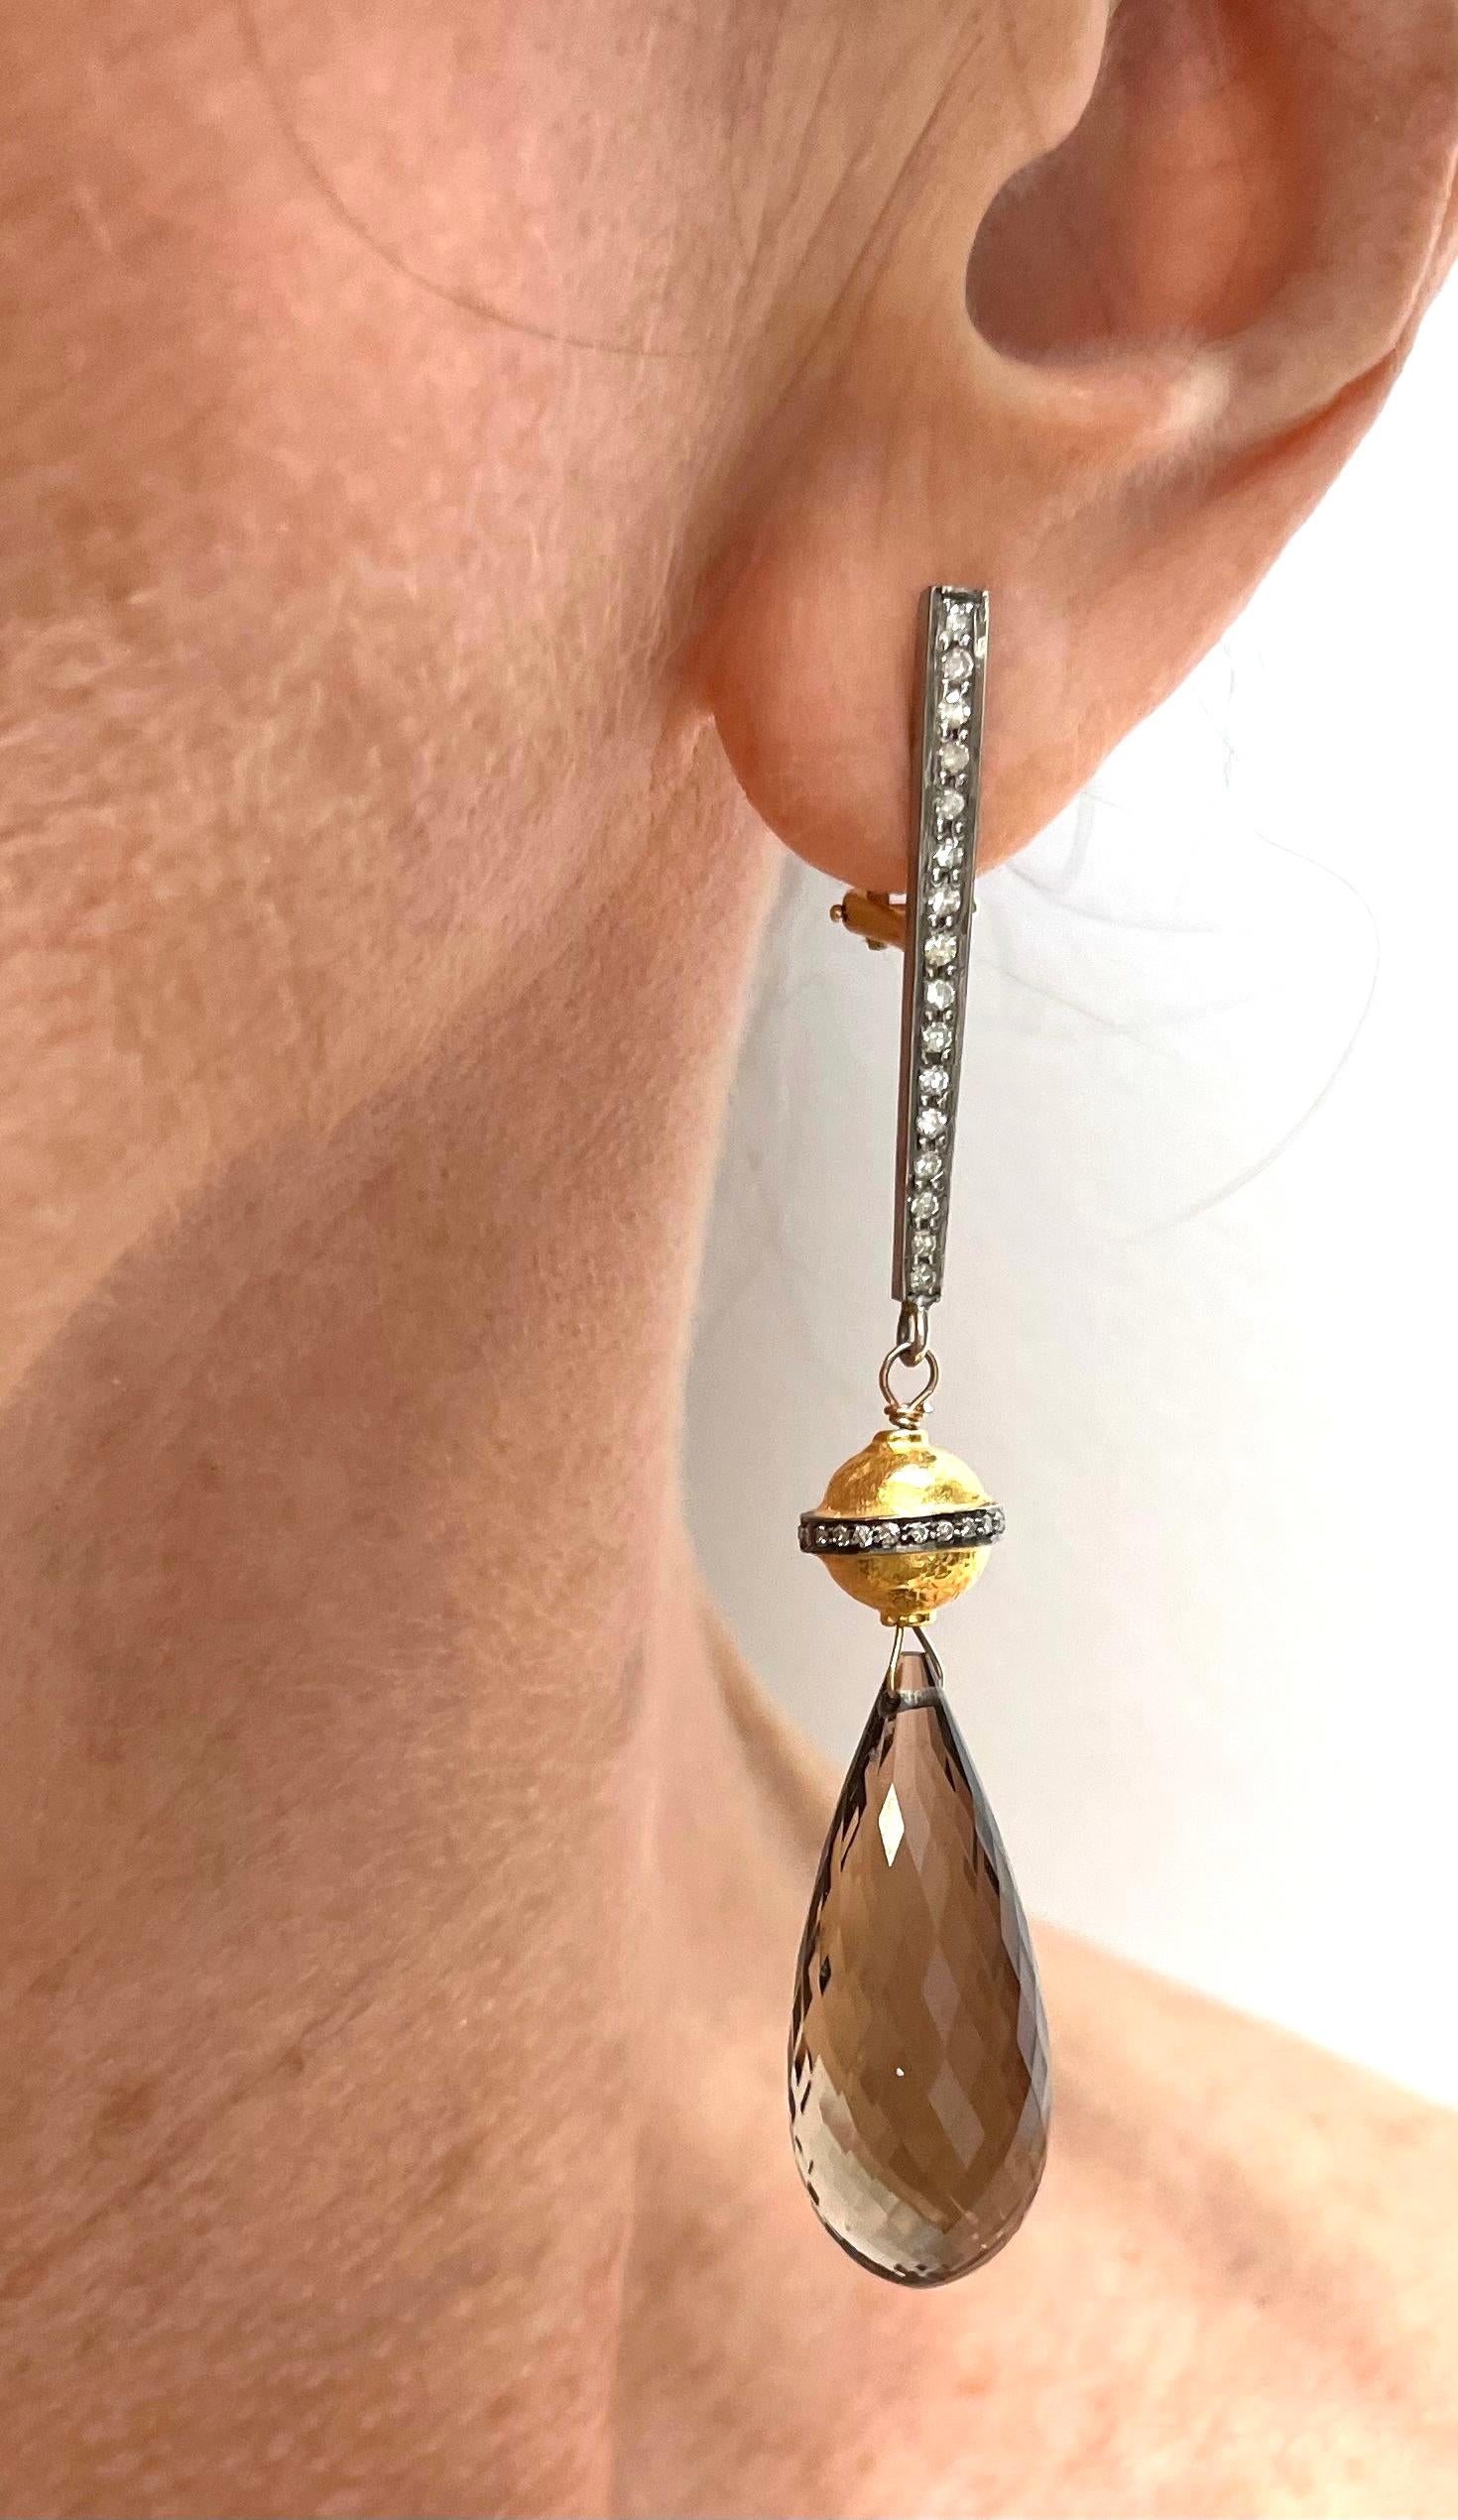 Description
Is simply elegant just what you need to add that finishing touch to your look? Sparkling faceted Smoky Quartz prominently suspends from a unique two-toned sphere encircled with a pave diamond band, all dangle effortlessly from a tapered